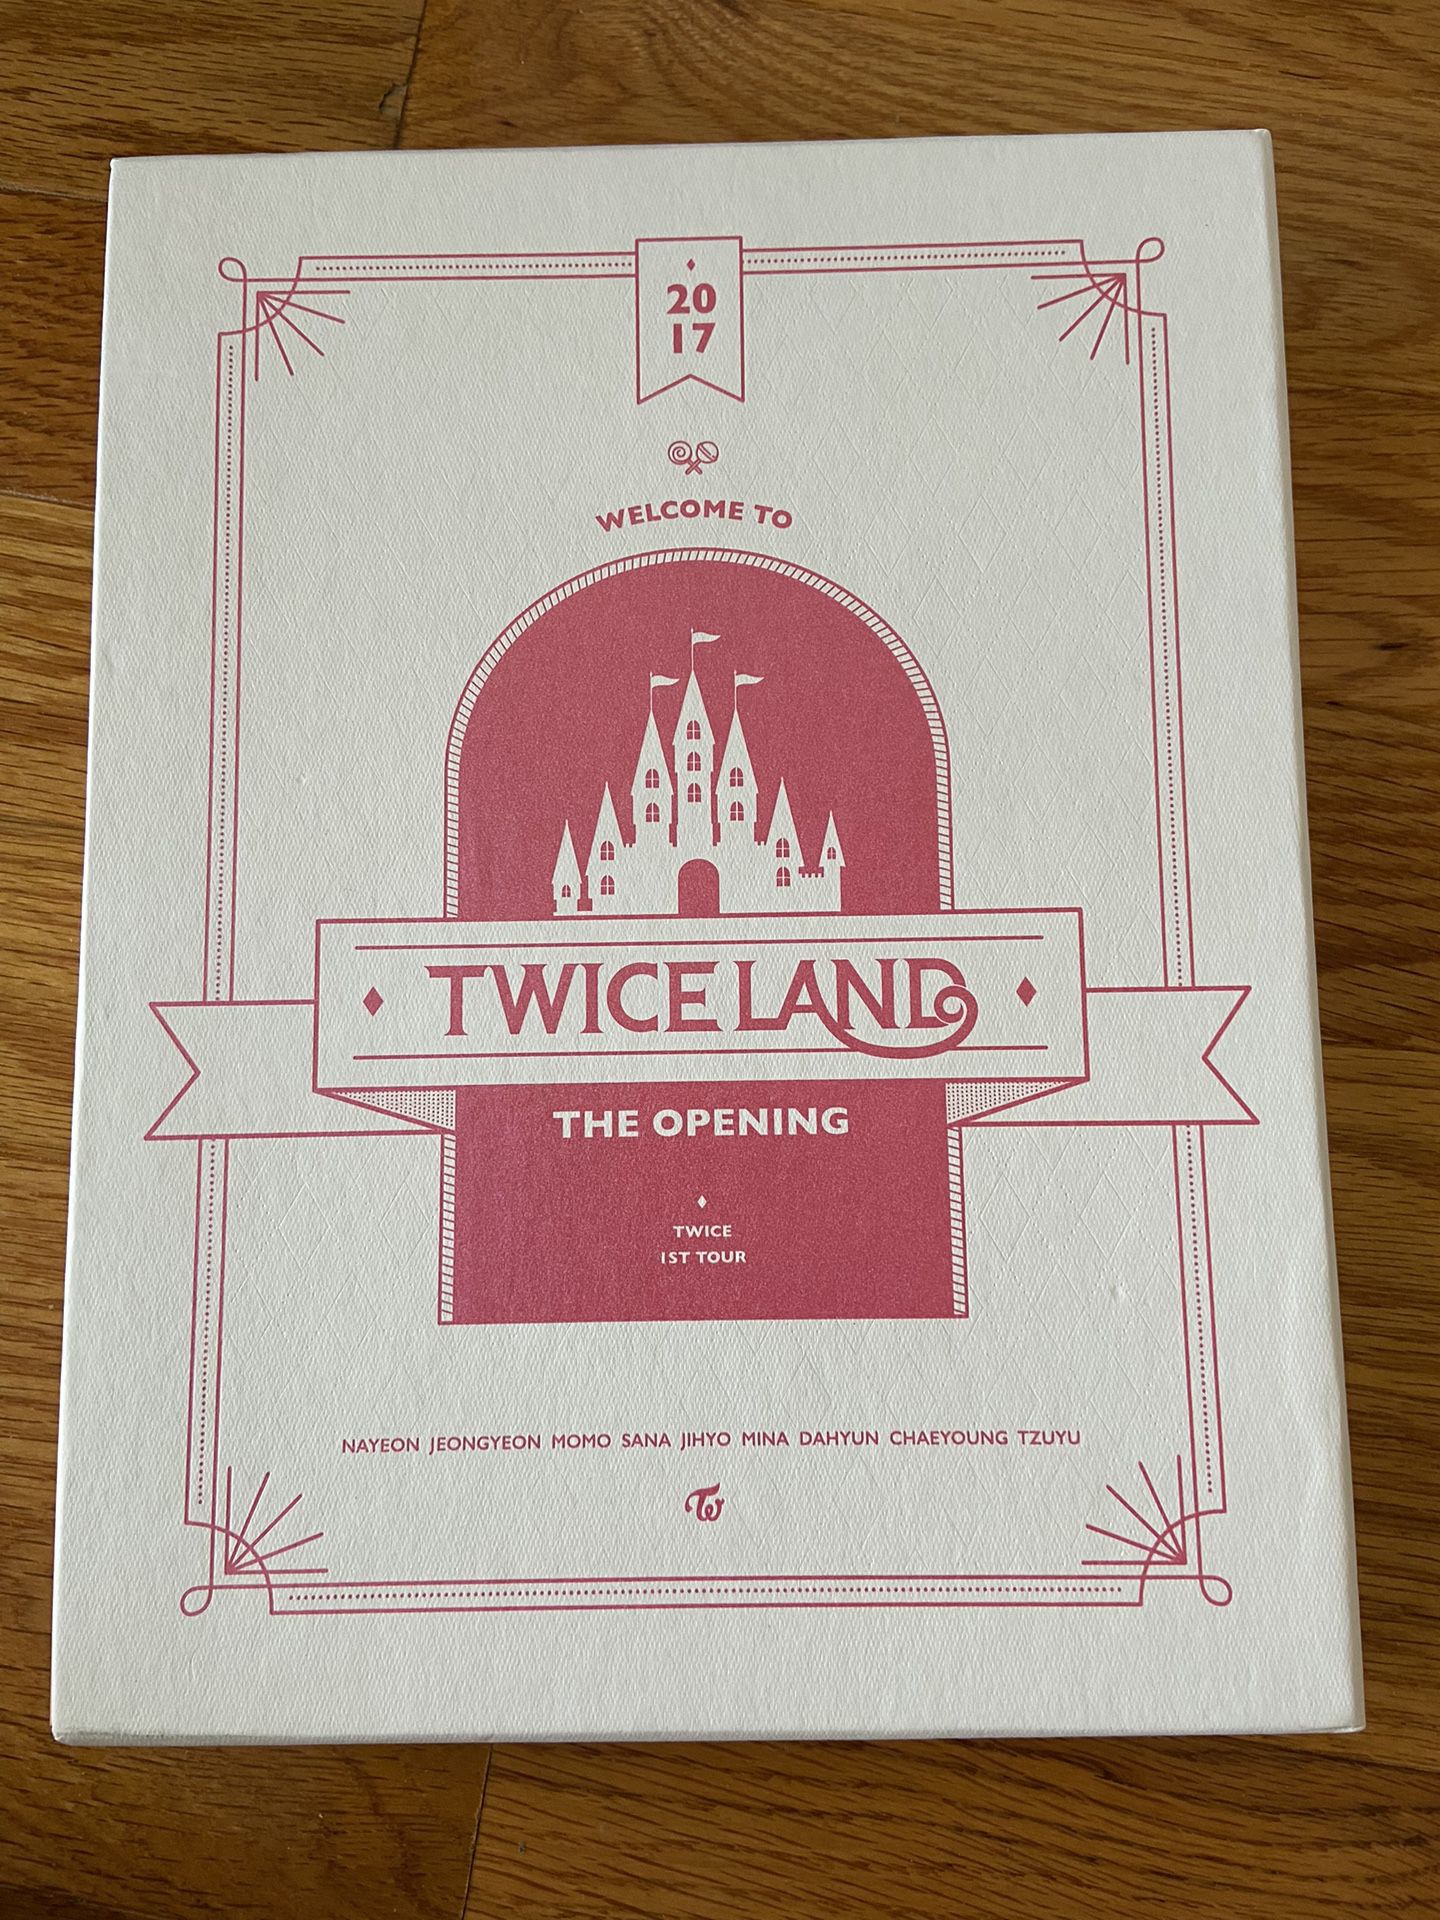 TWICELAND THE OPENING 